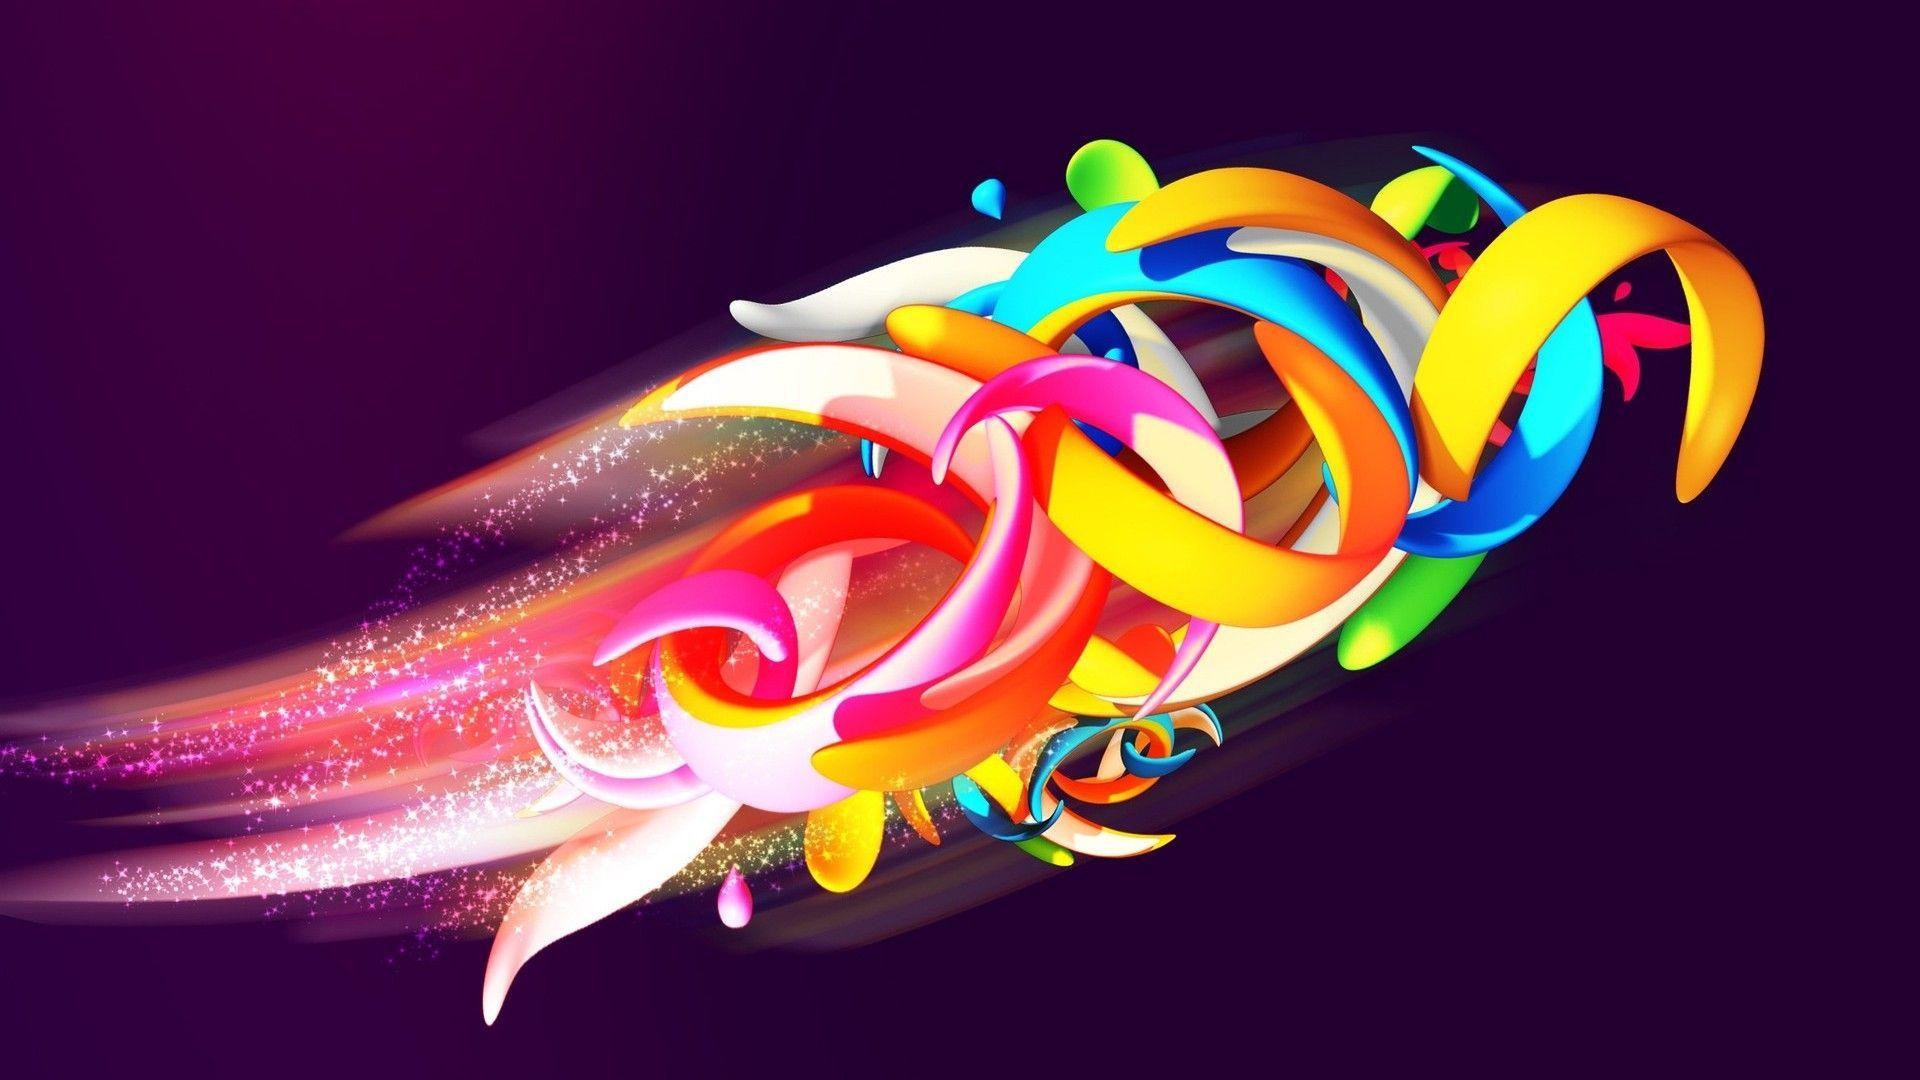 Colorful Shapes Abstract HD Wallpaper. High Quality Wallpaper